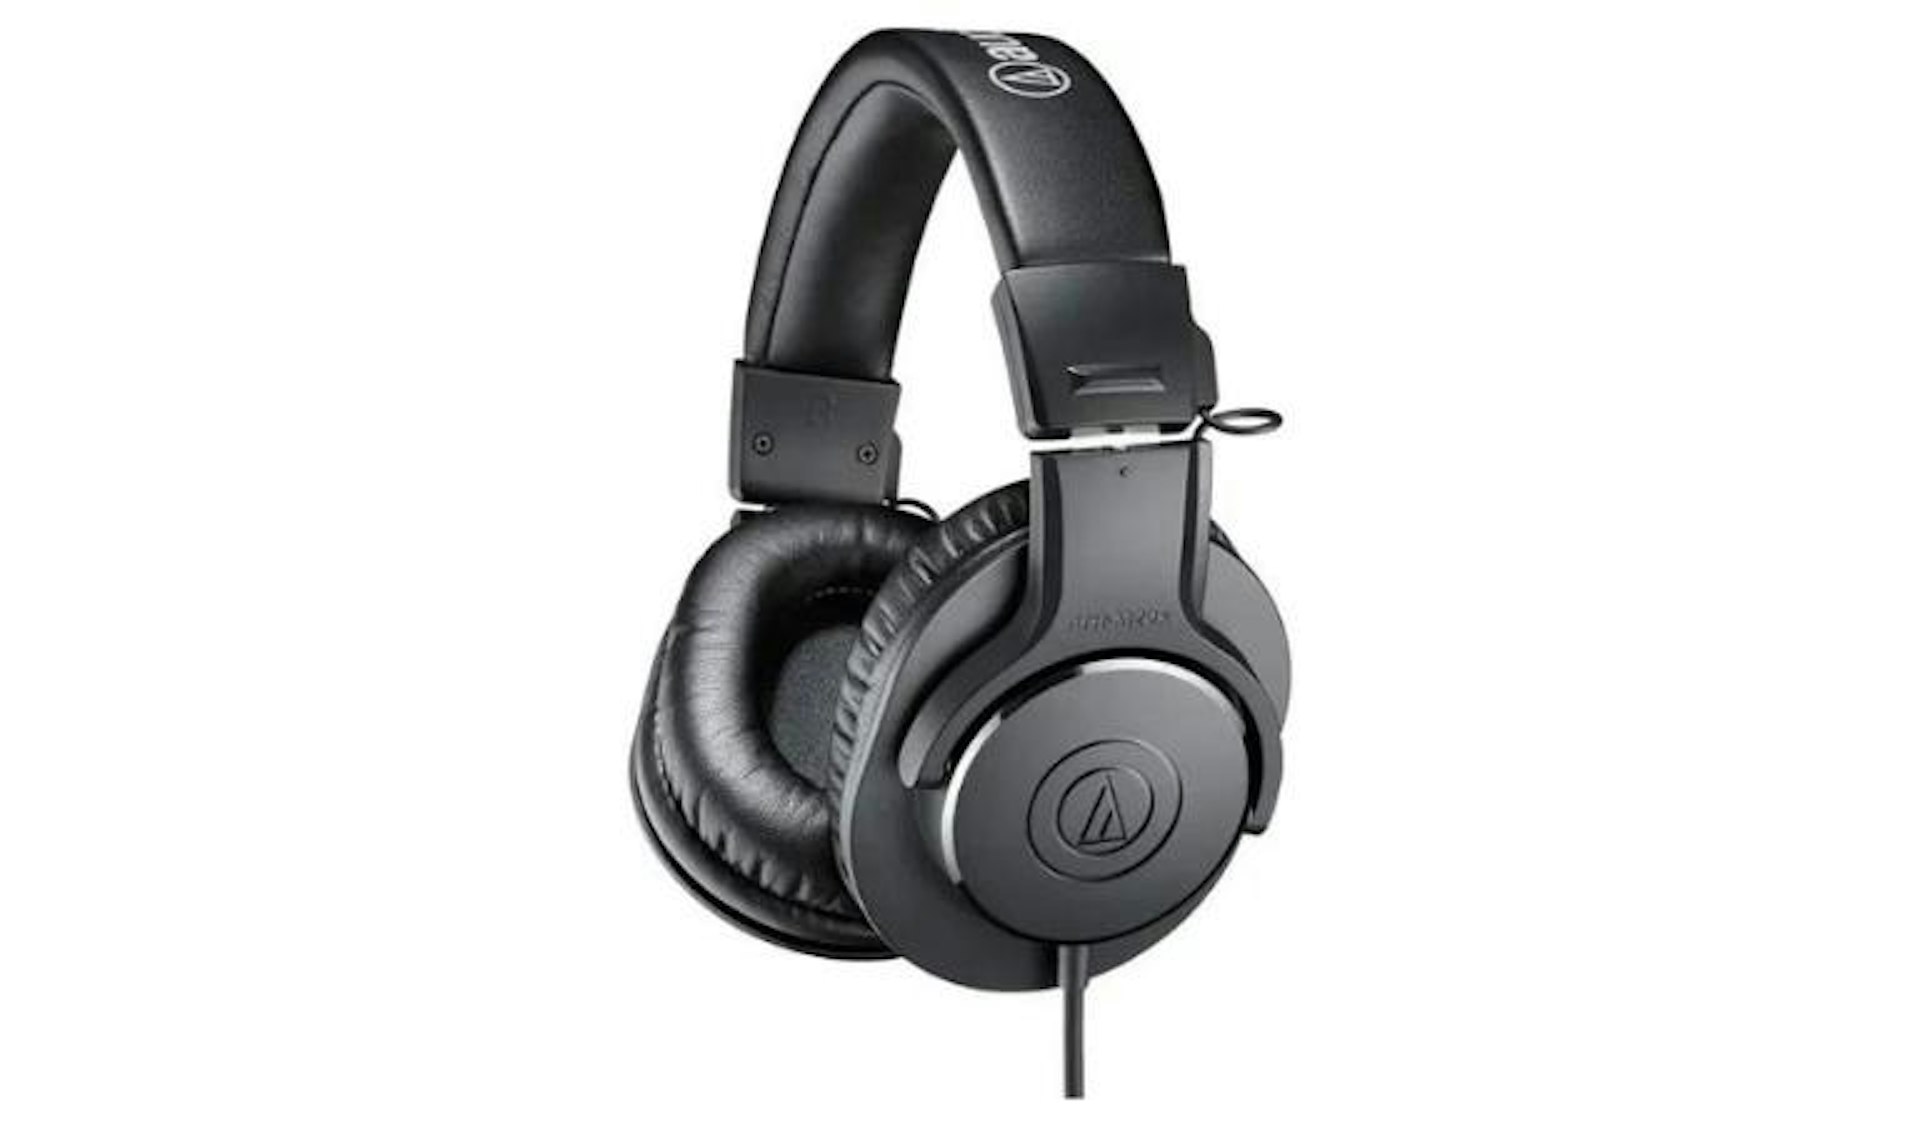 The Audio-Technica ATH-M20x is one of the best affordable podcast headphones.